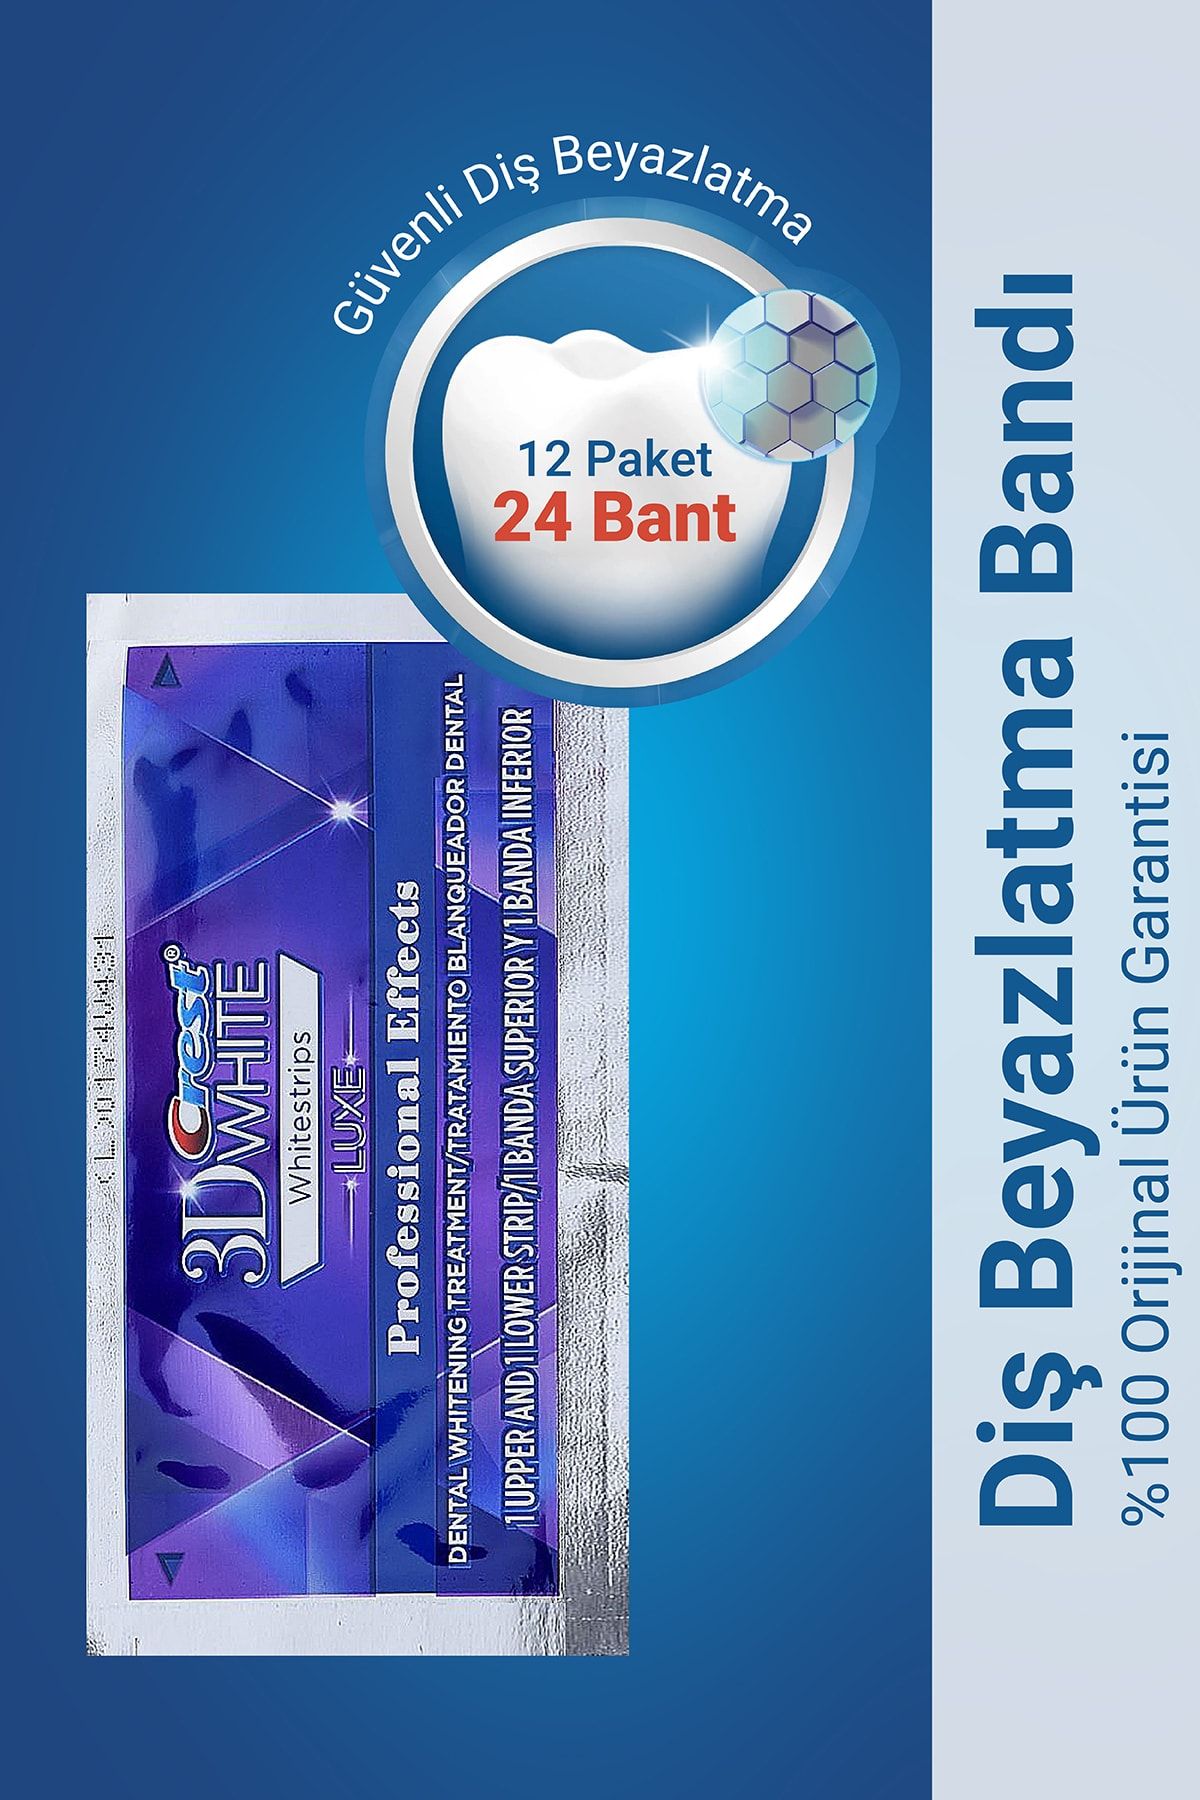 CREST 3d Whitestrips Professional Effects (12 Paket / 24 Bant)